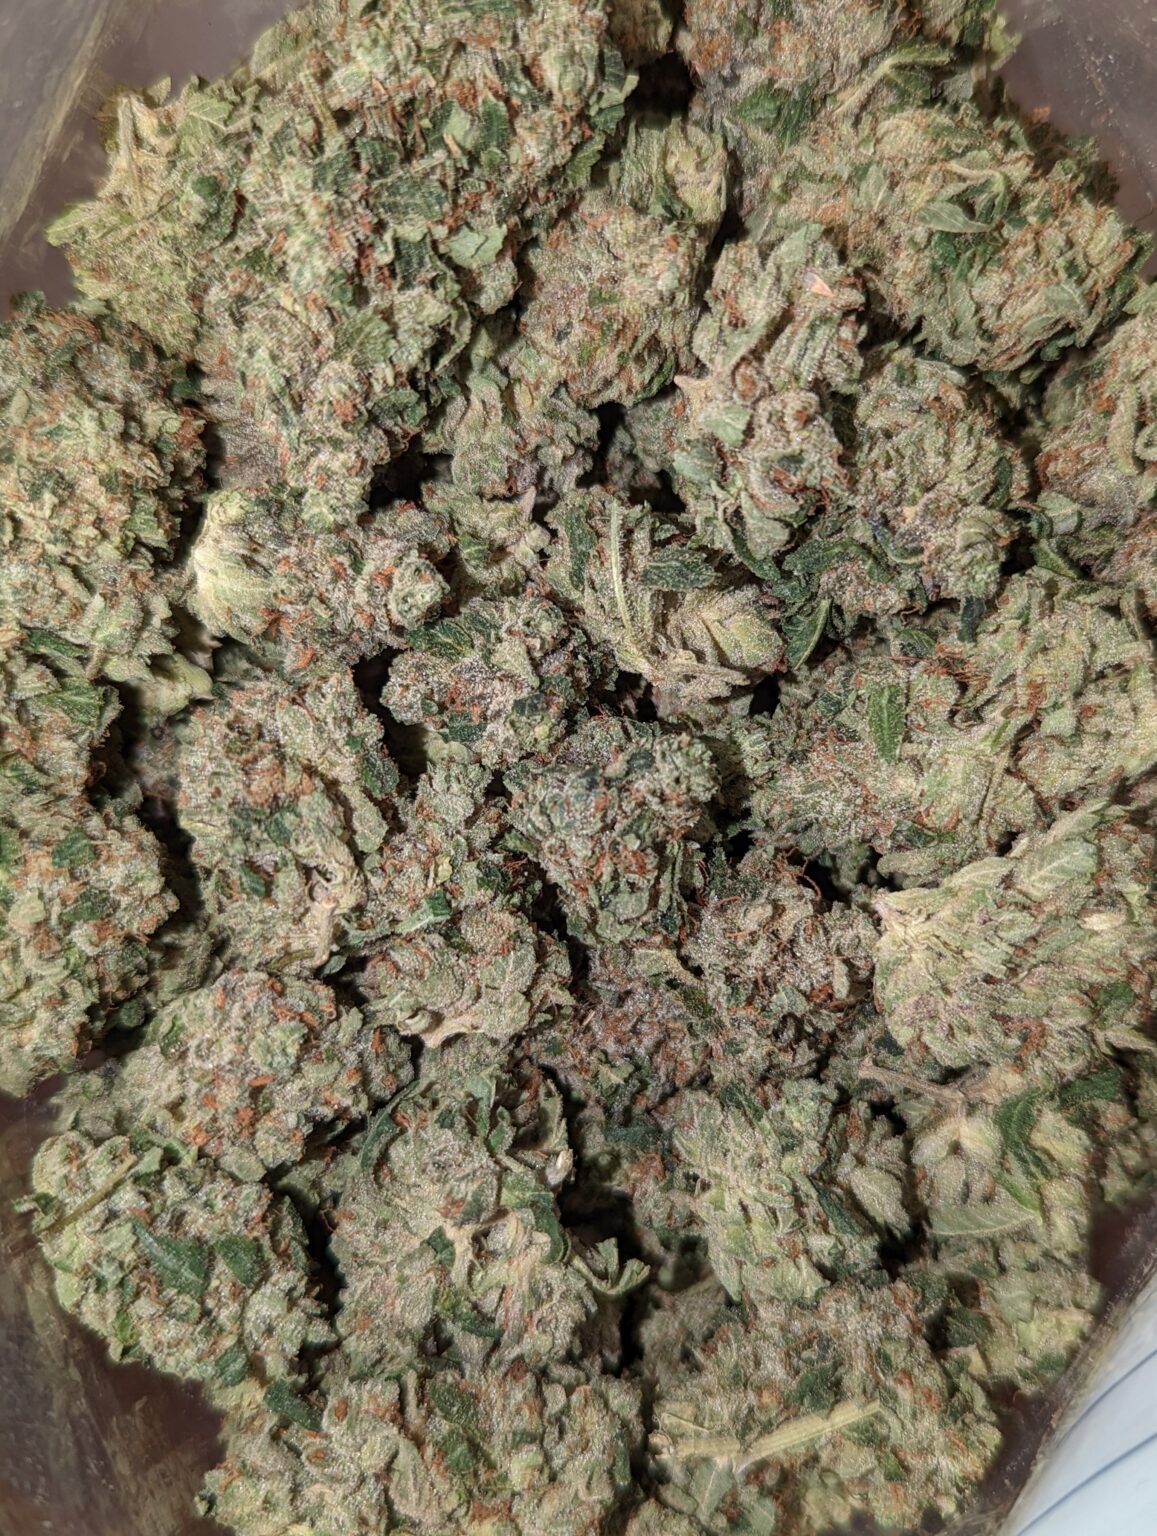 Buy Blue Cheese (AAA) Online at Top Shelf BC